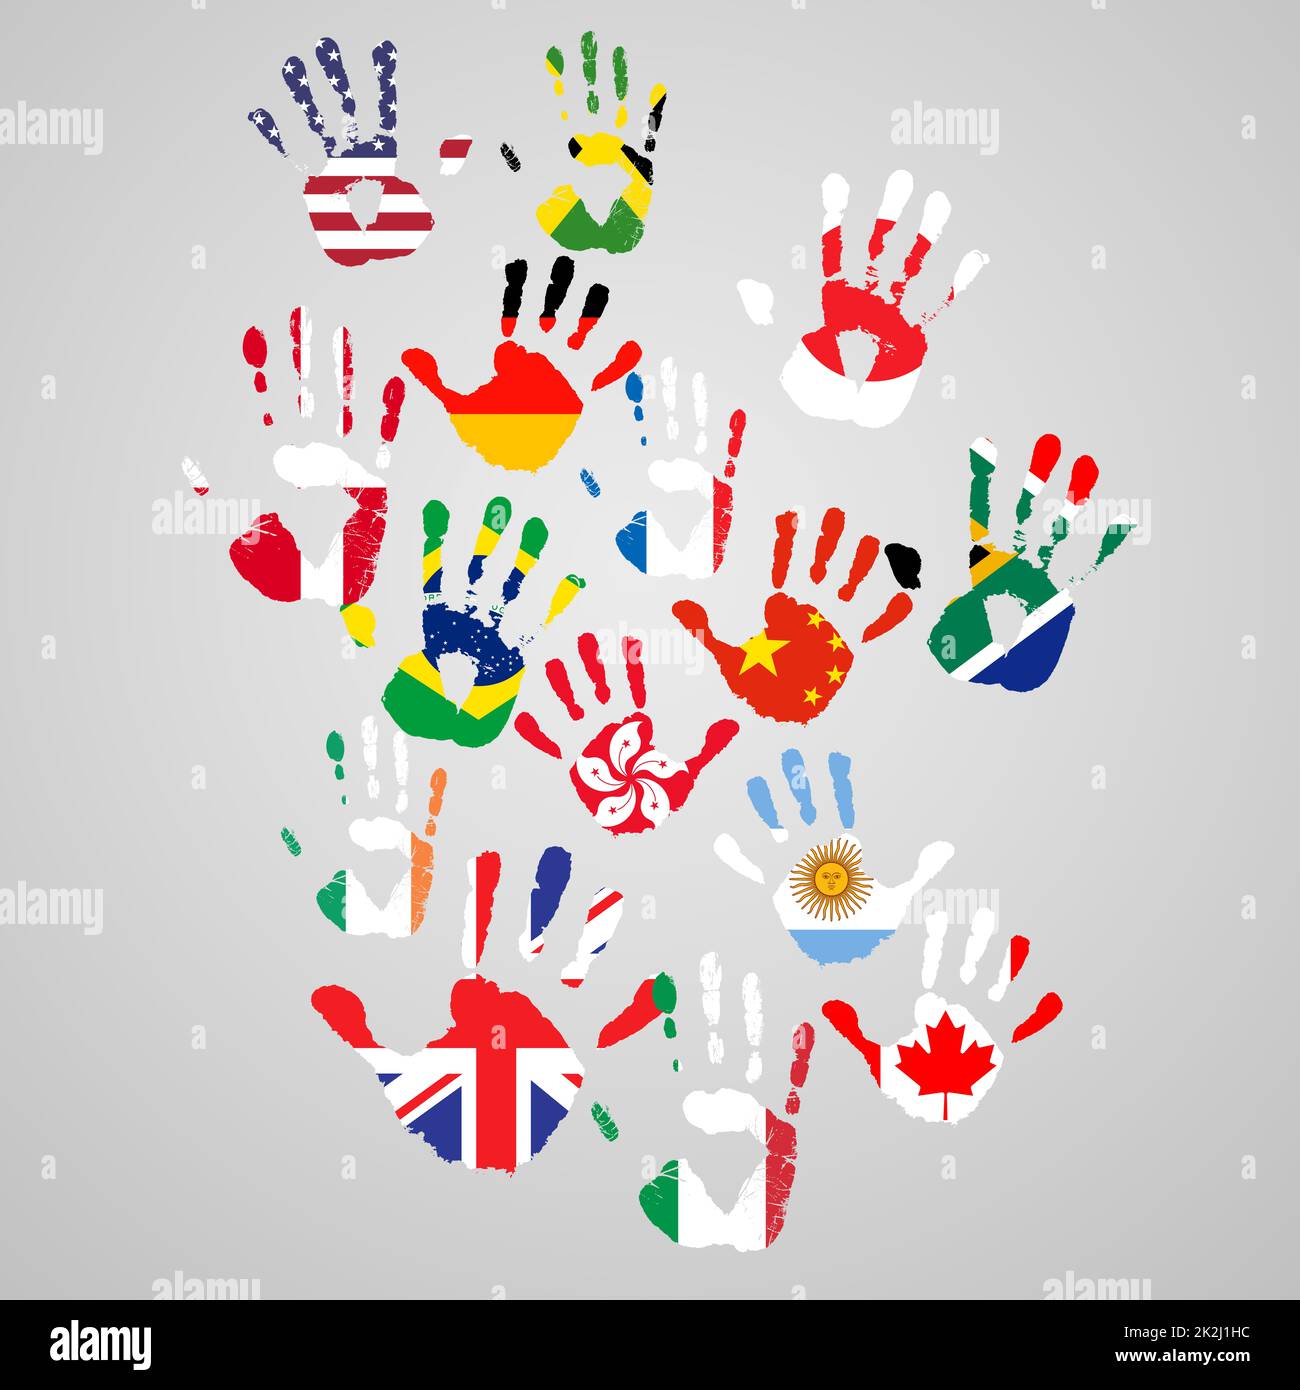 Lending a hand to global change. Representations of handprints from people around the world. Stock Photo